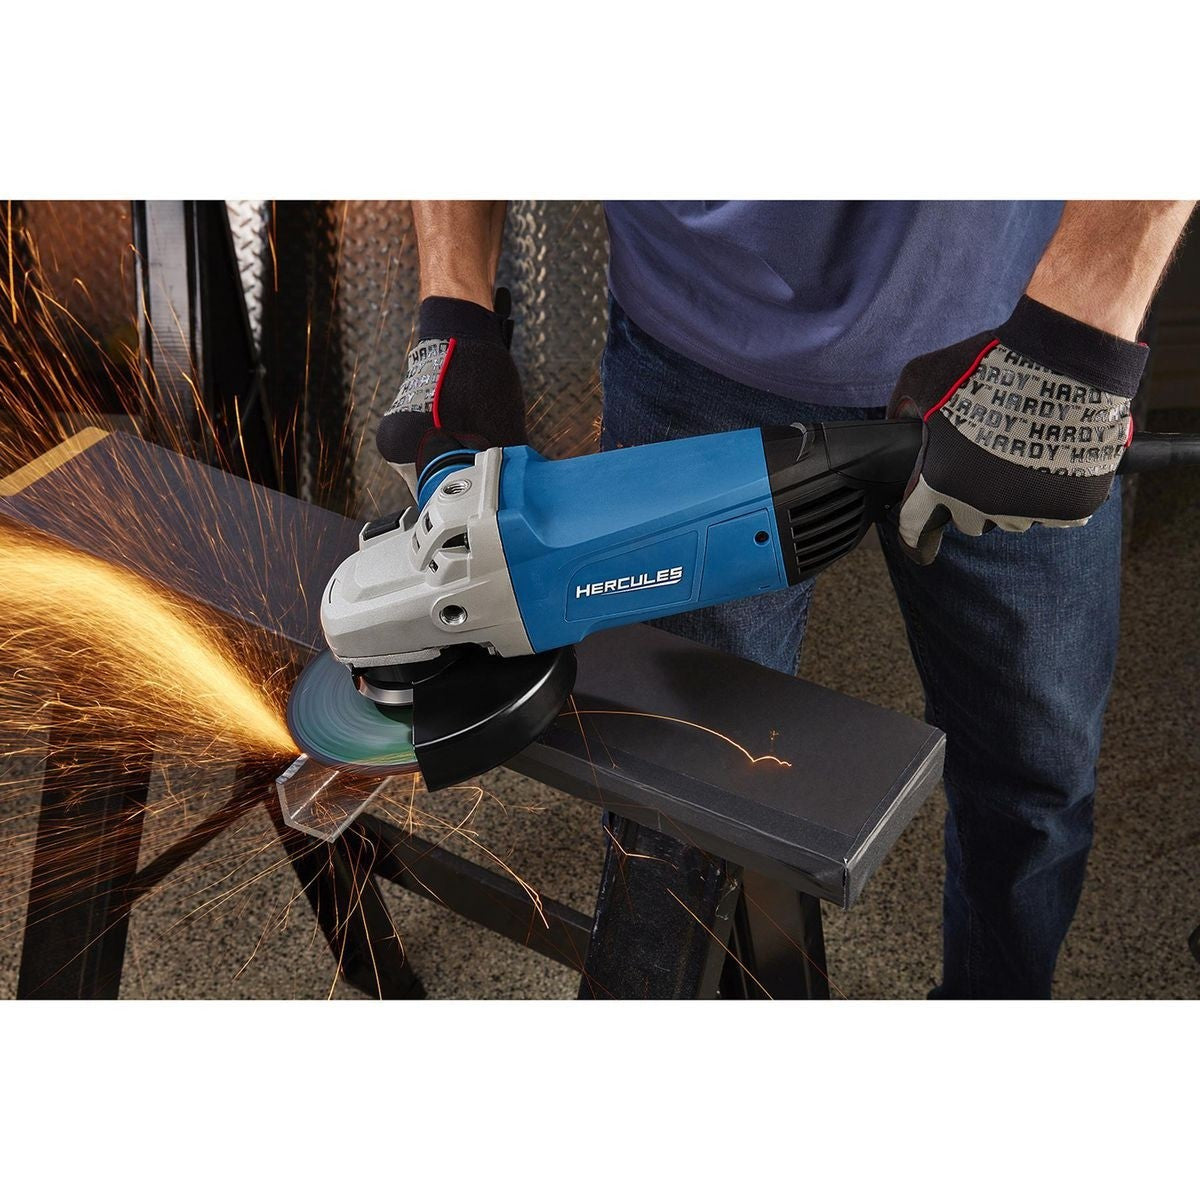 HERCULES In./9 In. 15 Amp Professional Corded Grinder – sosoutils